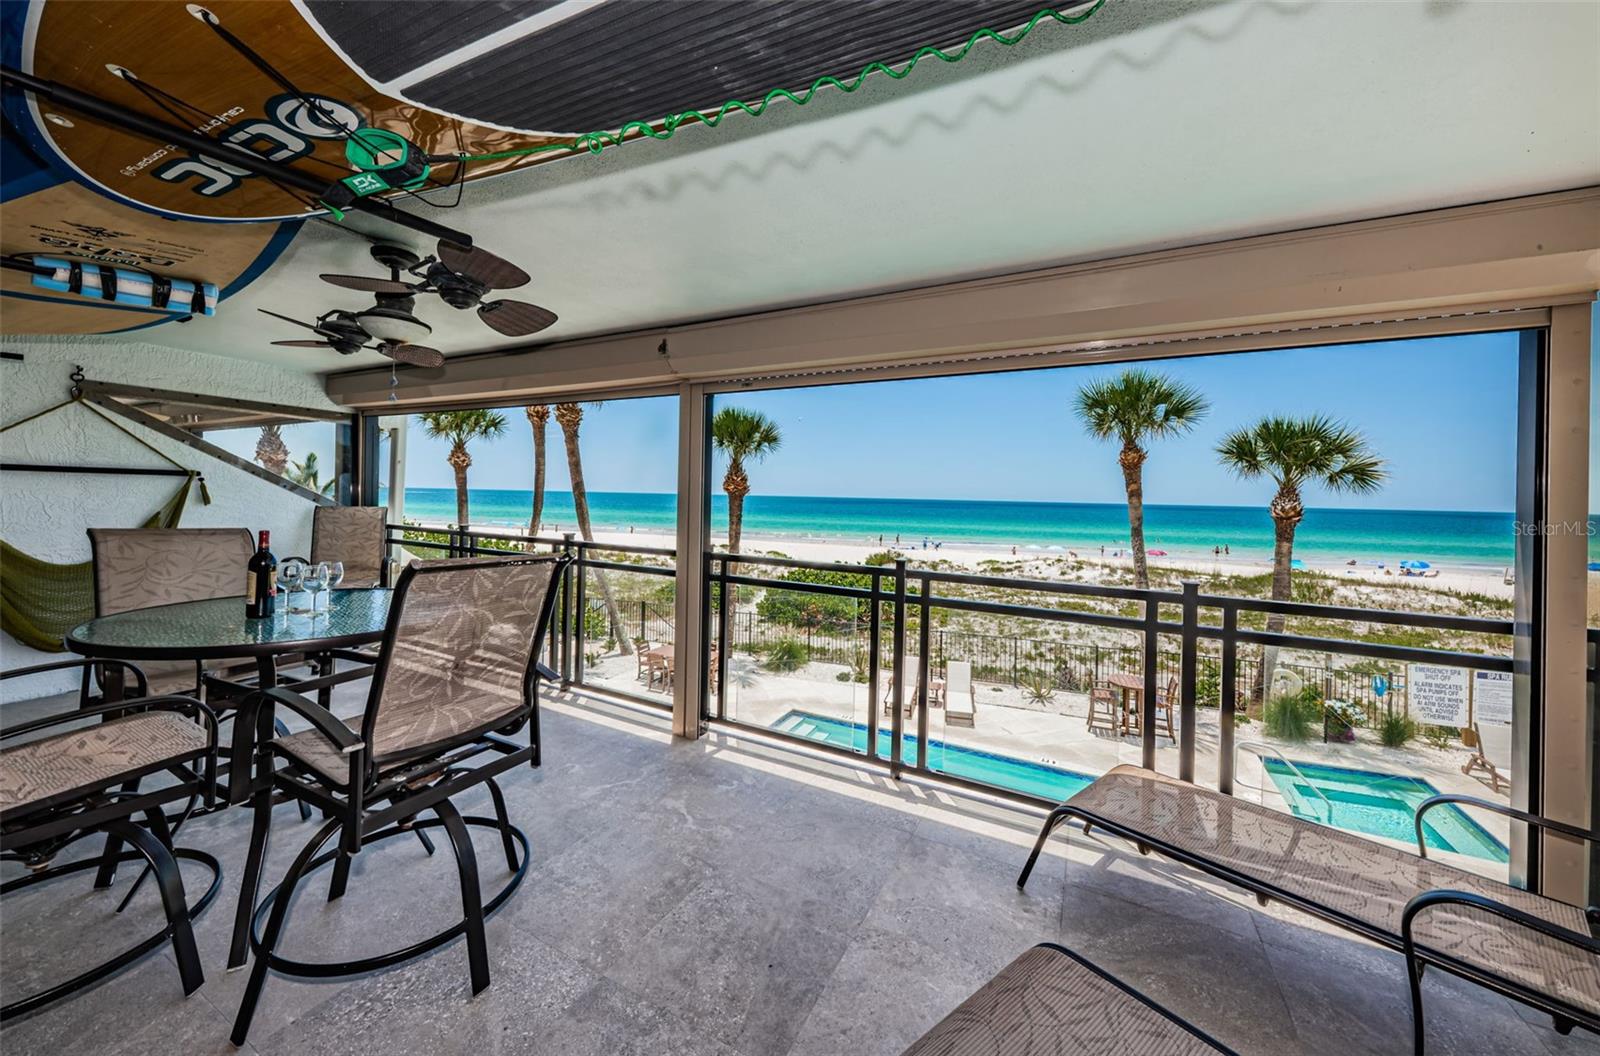 .. Residence # 130 Enjoys a Full Length 26' X 10' Gulf Front Balcony - Equipped with Electric Storm Shutters - Which Makes for Easy Shut Down to Protect Furniture or Use as Afternoon Sun Shades..